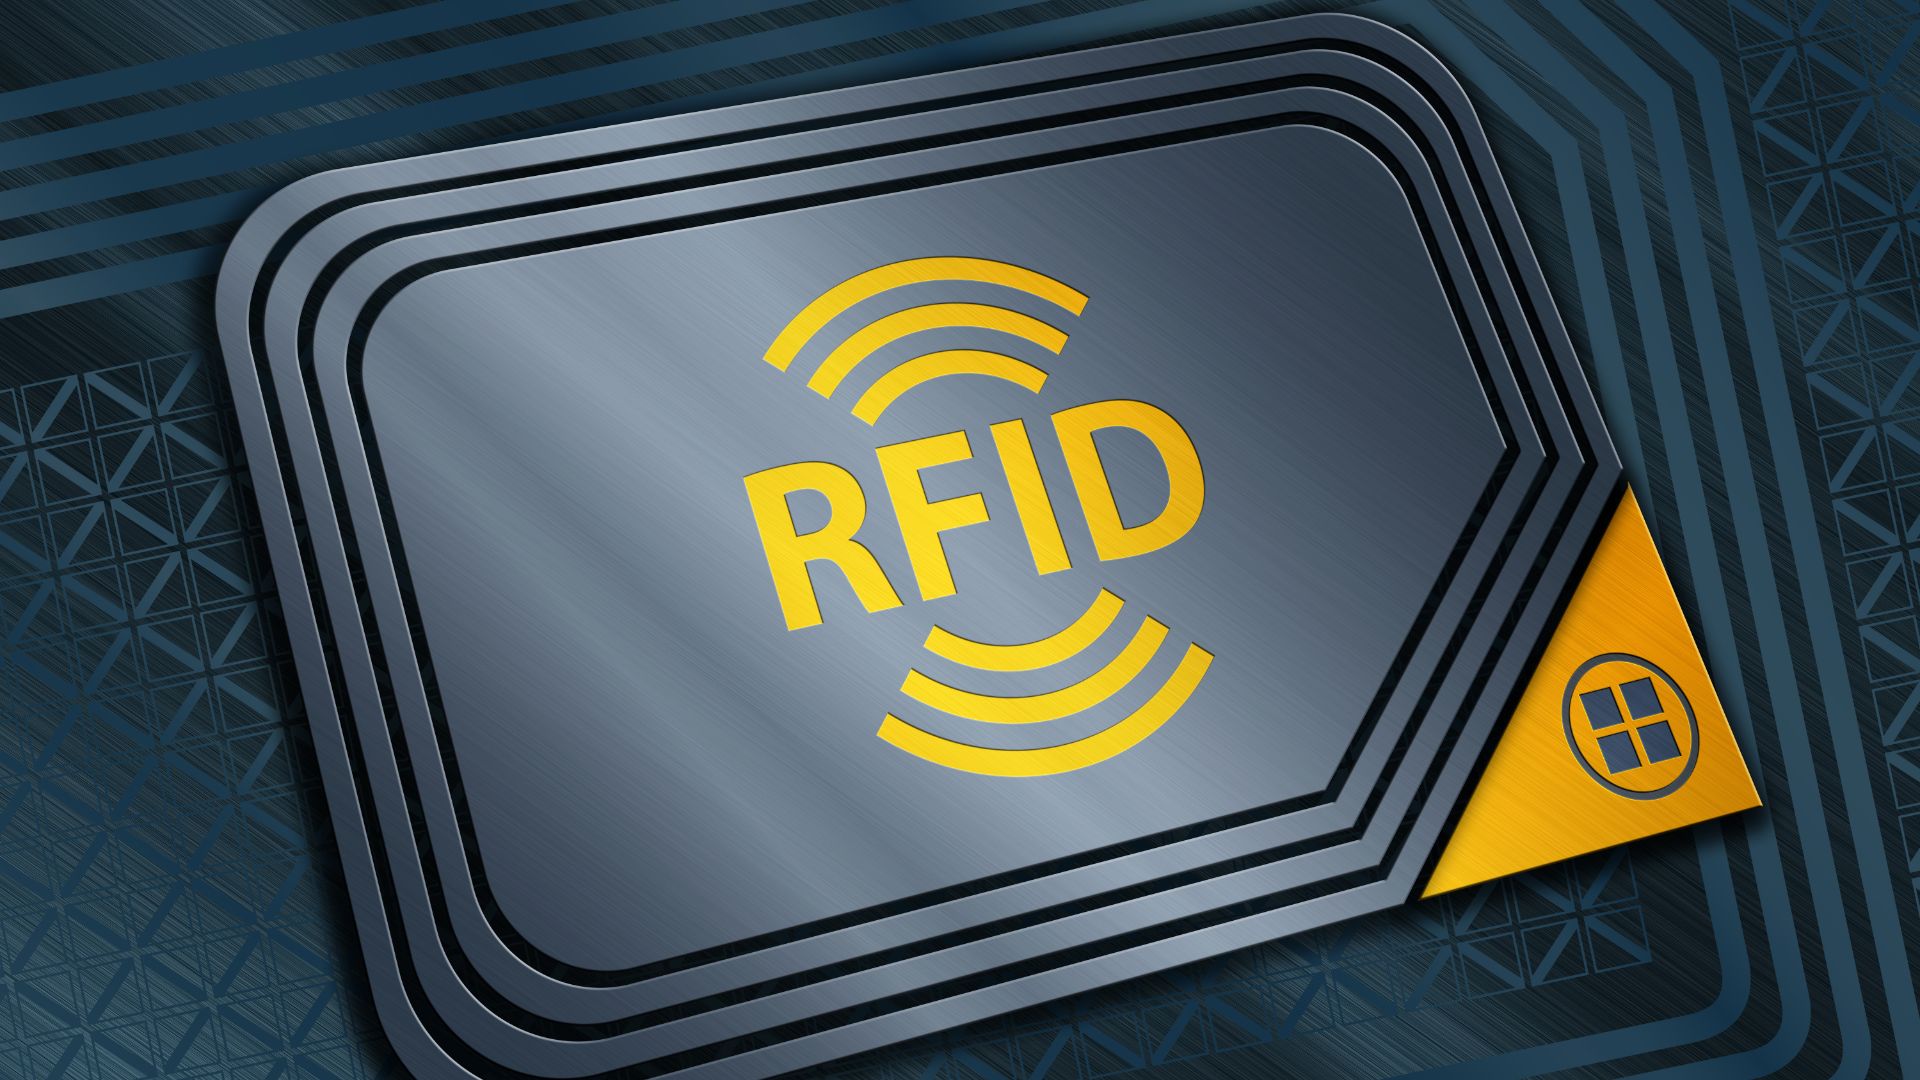 Should All Major Retailing and Manufacturing Companies Switch to RFID?